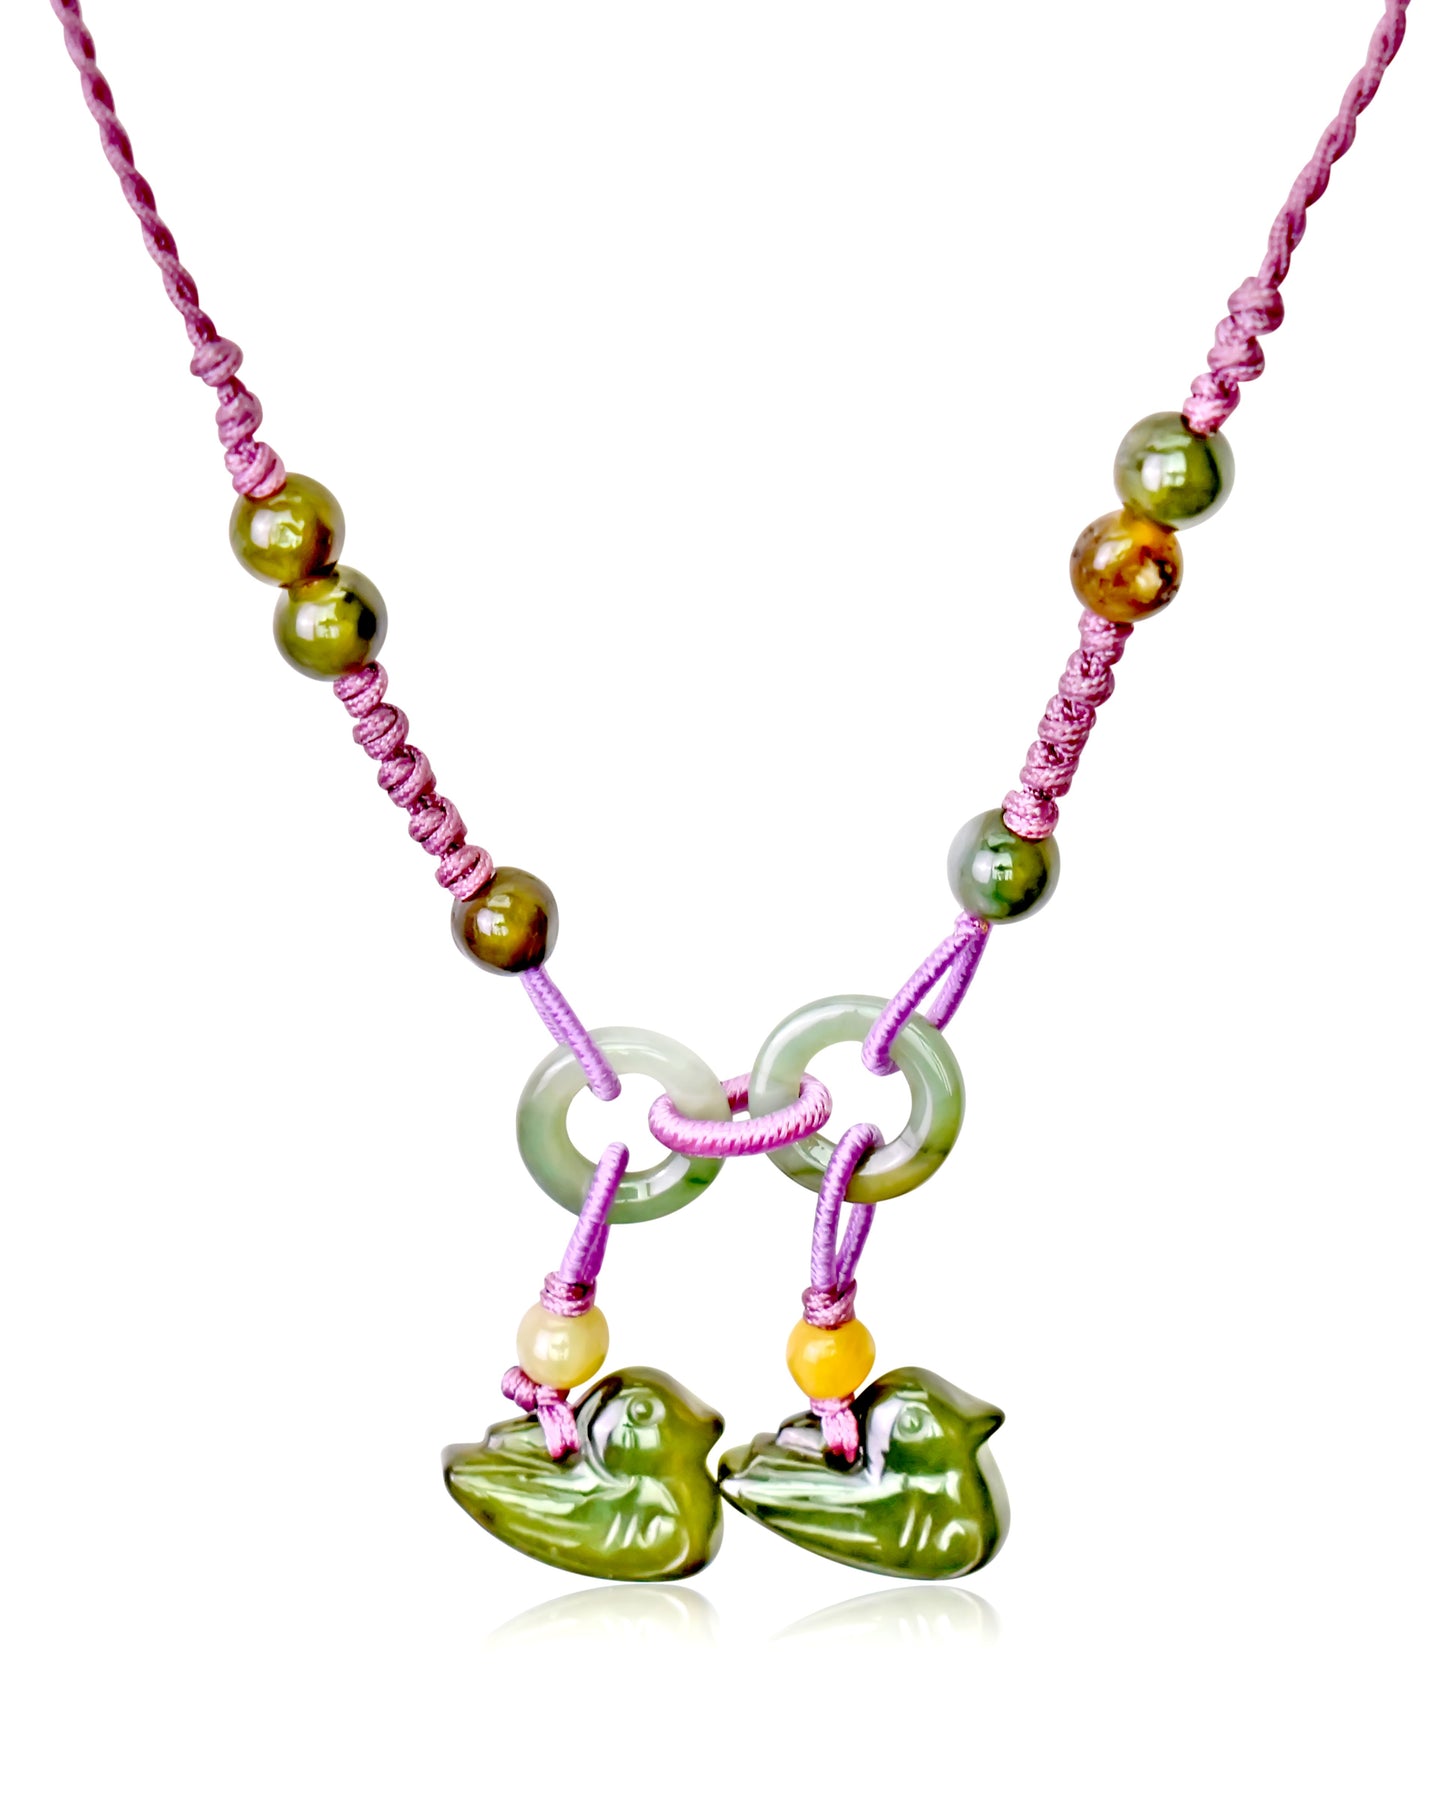 Feel Your Inner Strength with Charming Doves Jade Necklace made with Lavender Cord